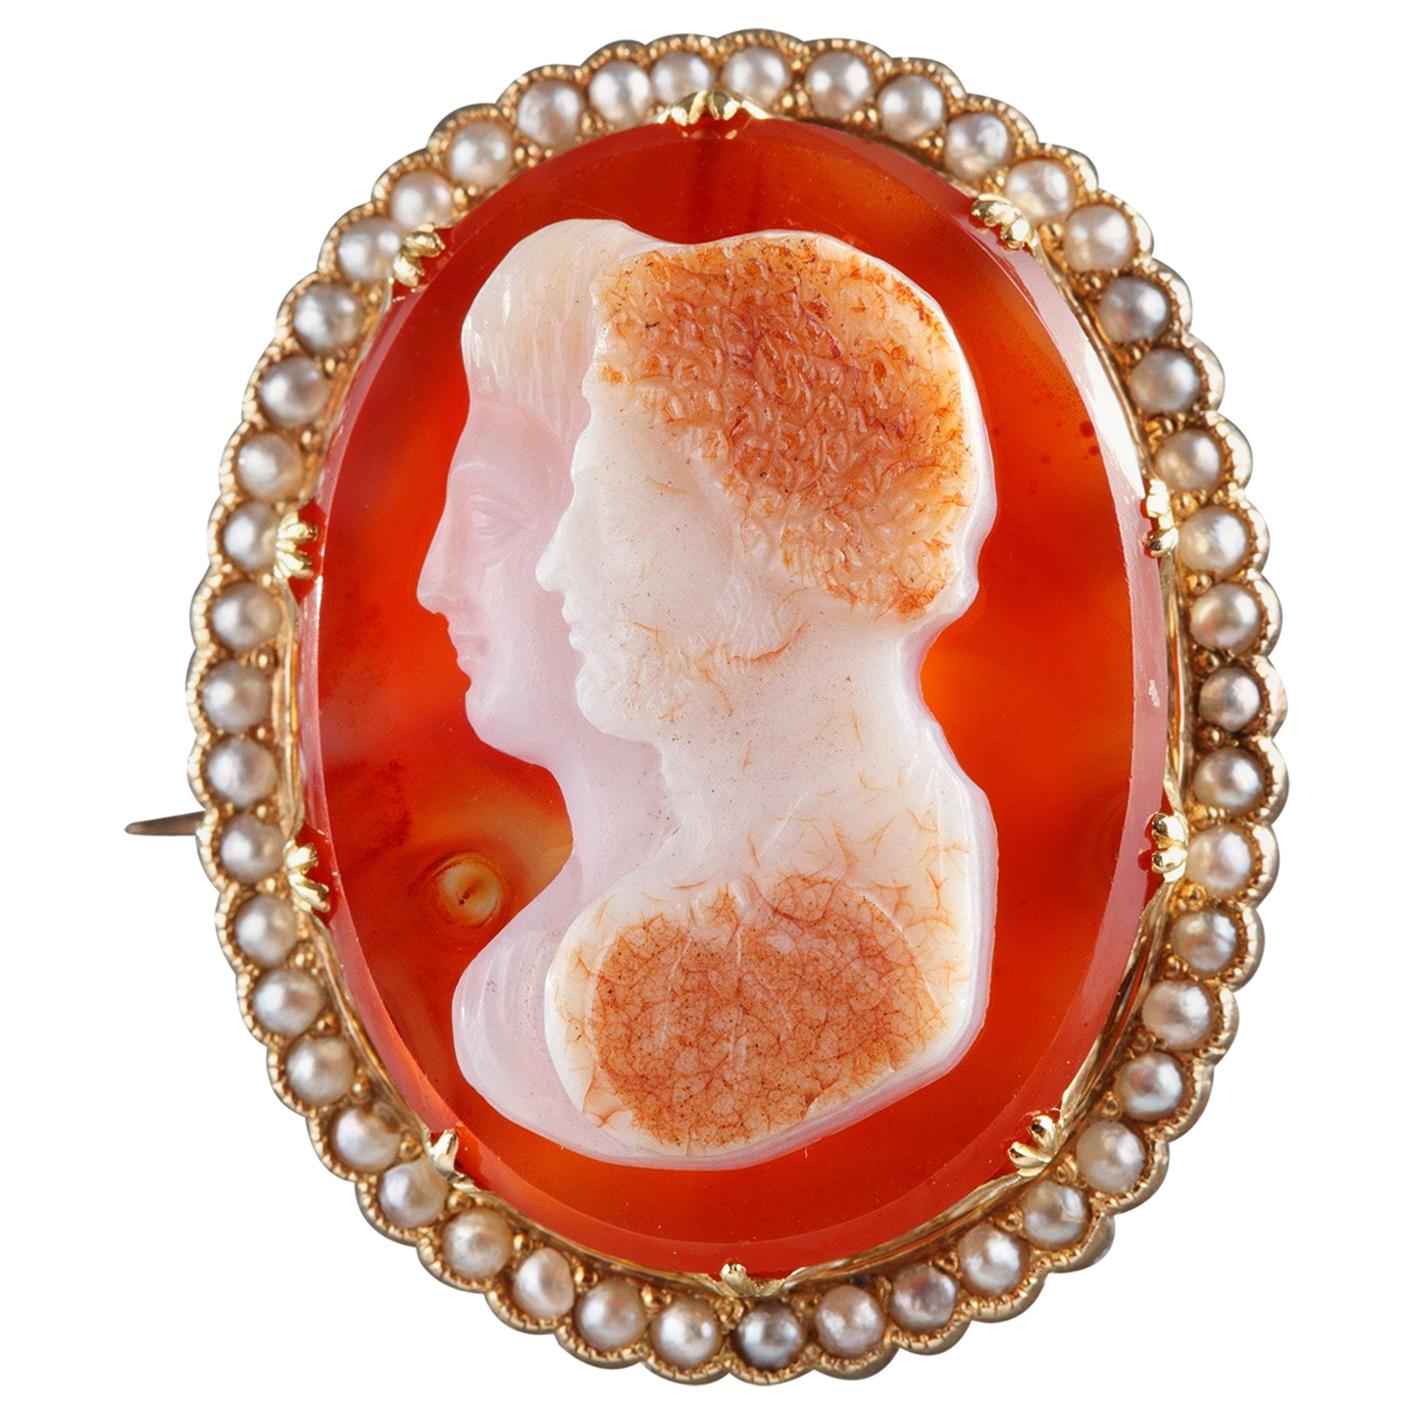 Napoleon III Gold-Mounted Agate Cameo Brooch, 19th Century